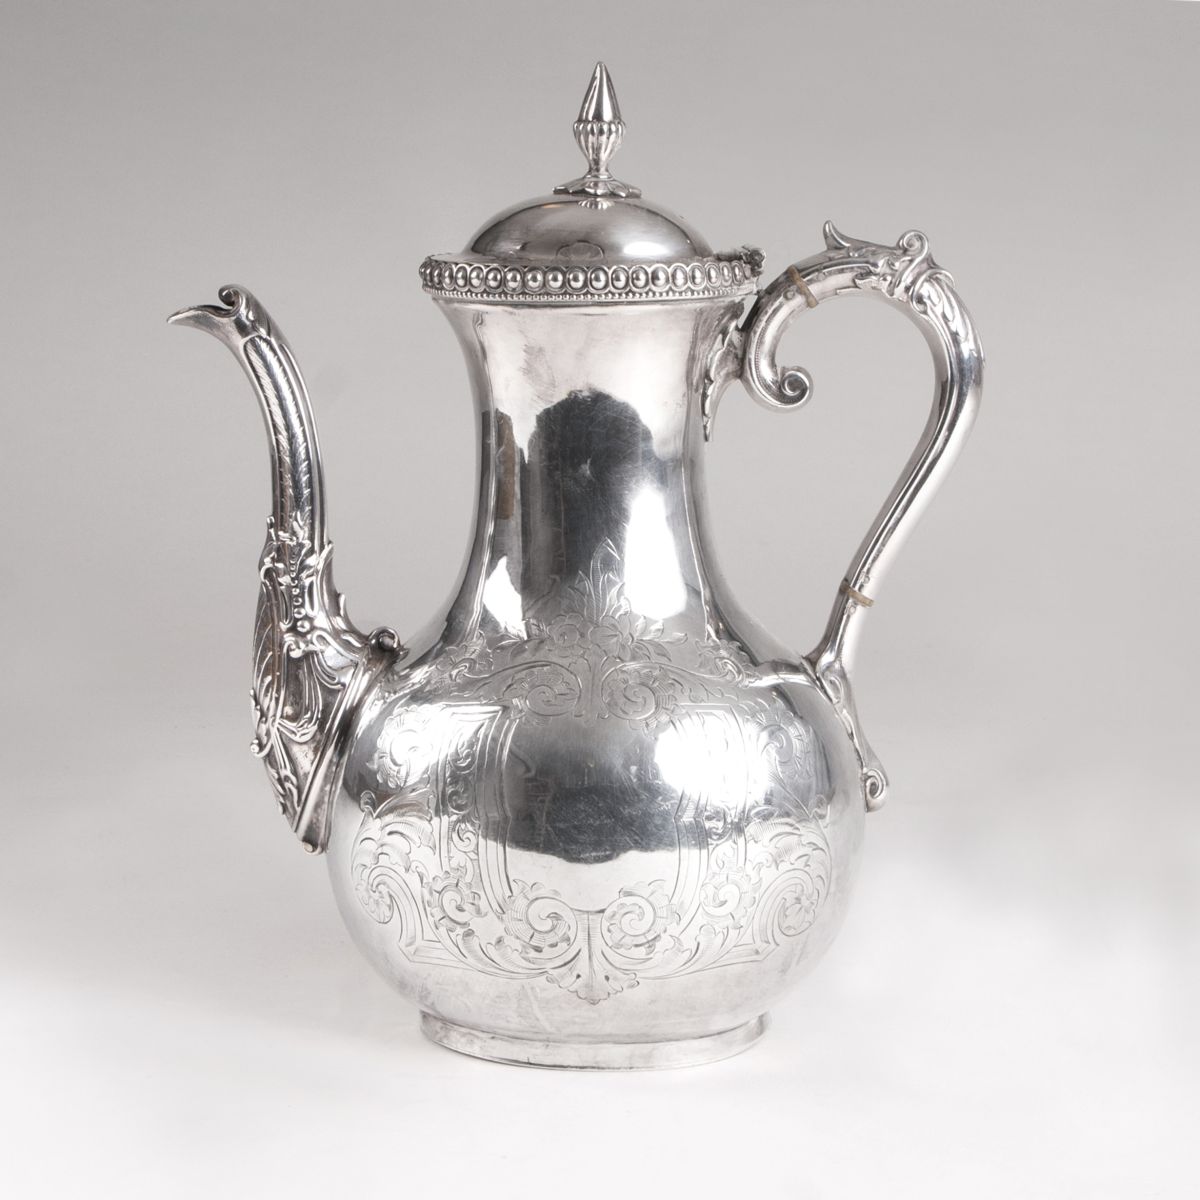 A coffee pot with flower engravings